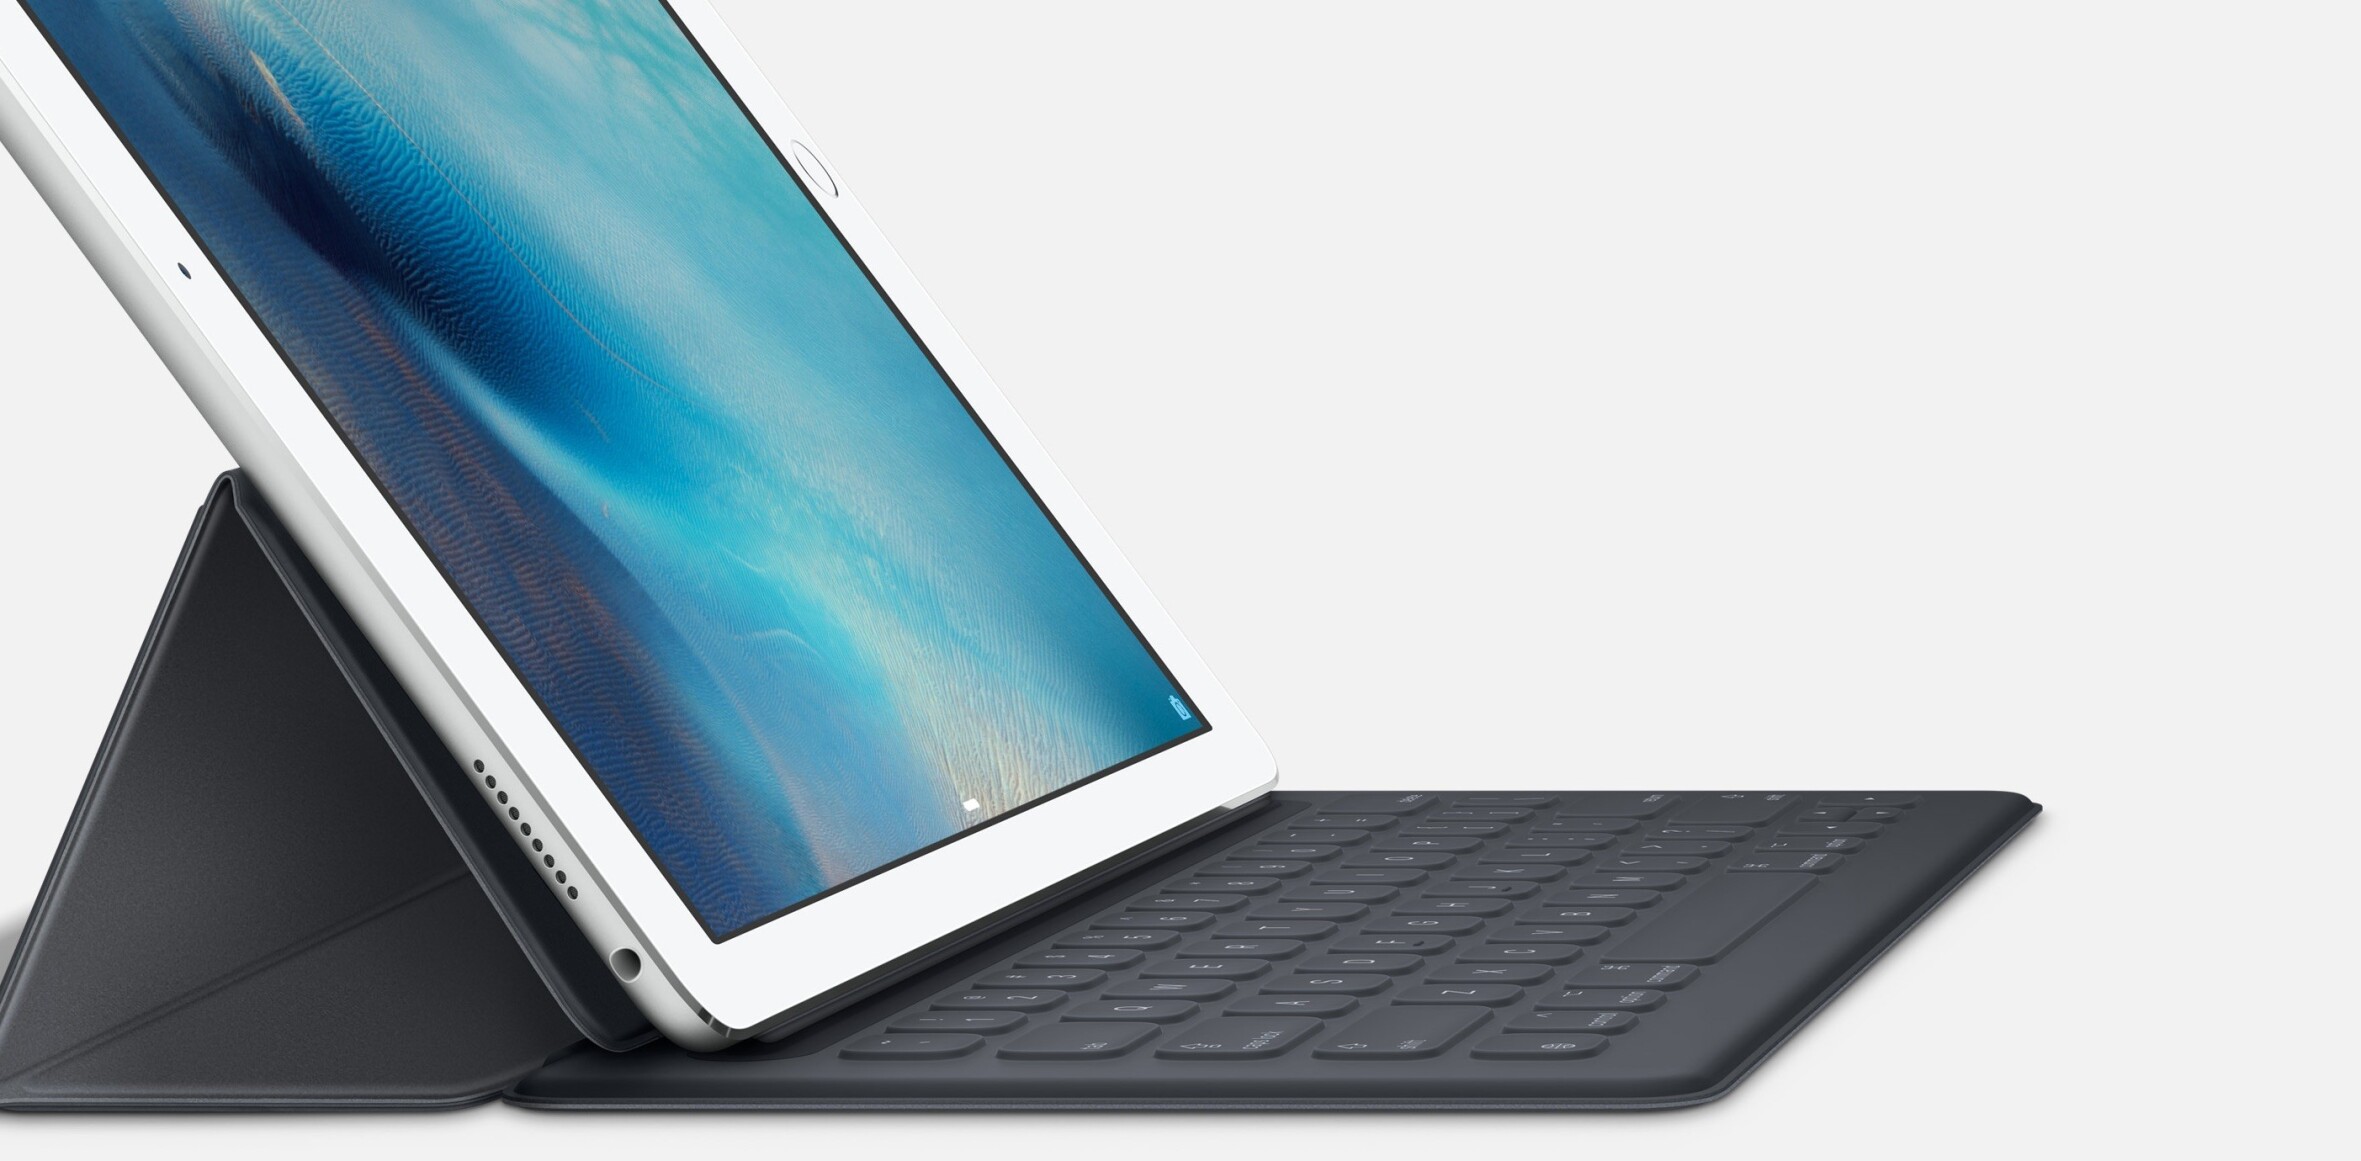 There’s one big problem with the iPad Pro: the homescreen